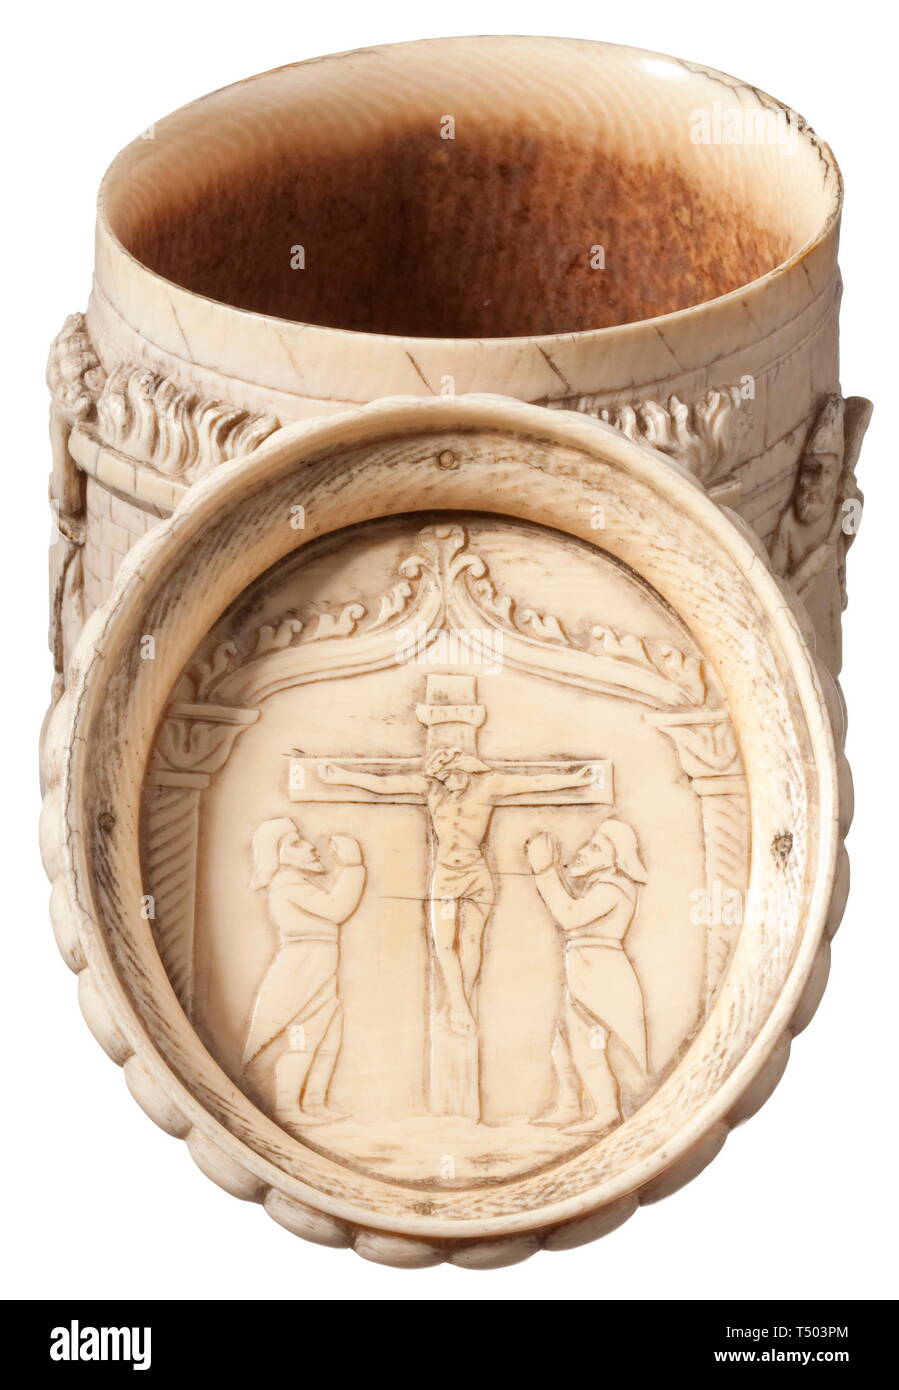 A Saxon ivory box with mining scenes , 1st half of the 18th century. The oval body carved with decorations in high relief. The exterior depicting the entrance of a mining tunnel with miners, transporting the ore in carts and crates. On the opposite side a furnace with tapping smeltery workers. The lid showing four miners with ore cars, the pommel in the shape of two crossed club hammers. Height 13.5 cm. historic, historical, handicrafts, handcraft, craft, object, objects, stills, clipping, clippings, cut out, cut-out, cut-outs, 18th century, Additional-Rights-Clearance-Info-Not-Available Stock Photo